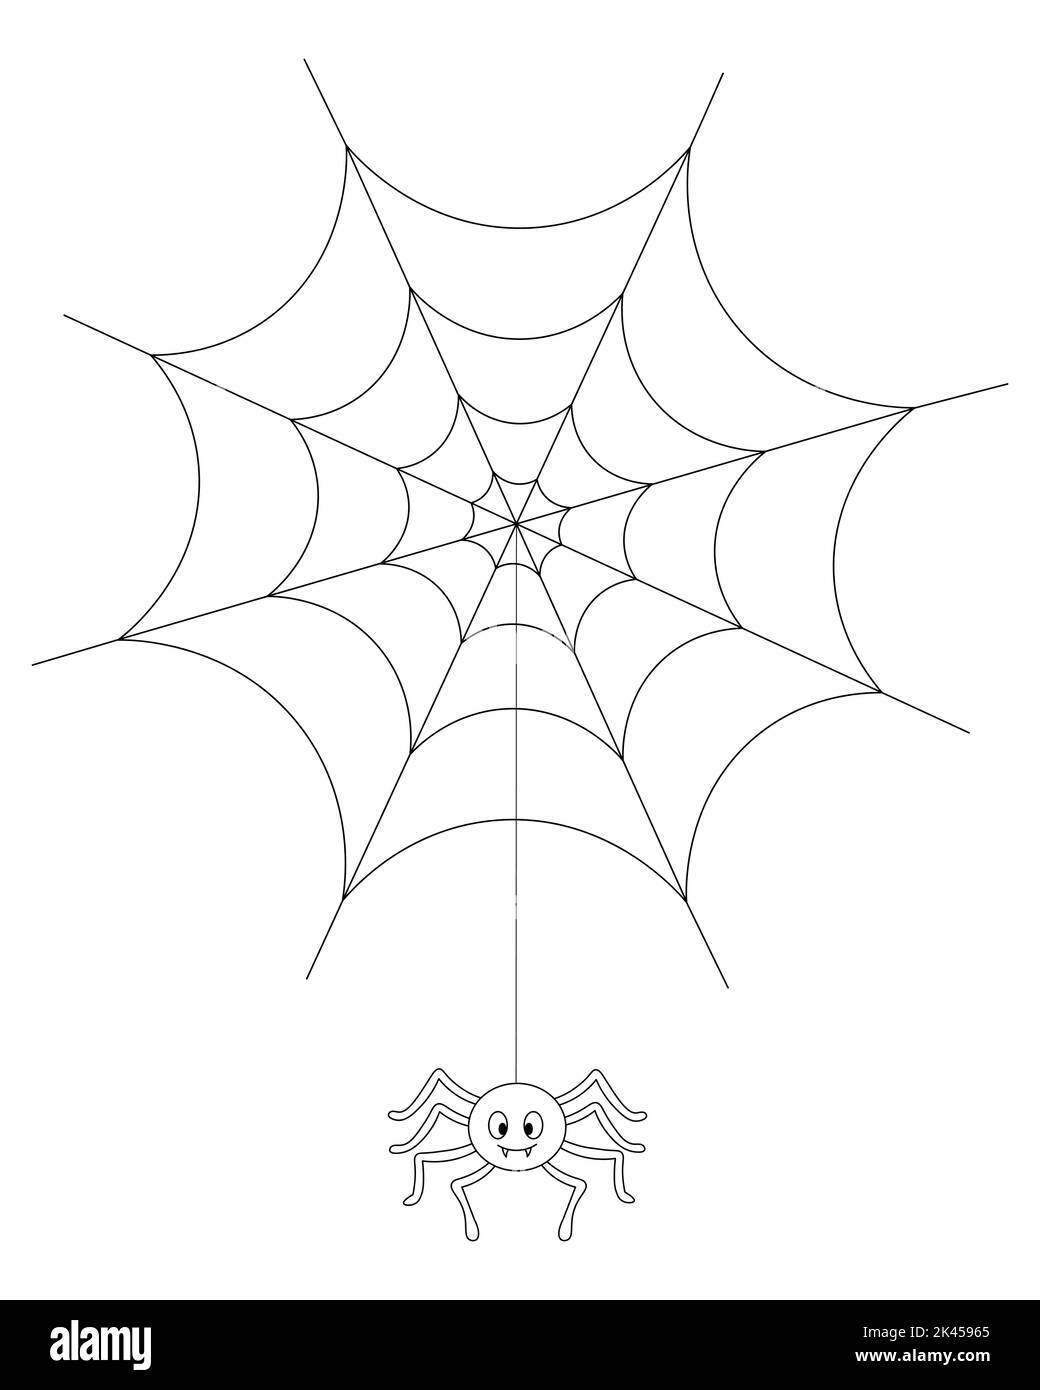 The spider weaves a web. The insect hangs on a thin thread. Vector illustration. Outline on an isolated white background. Doodle style. Coloring book Stock Vector